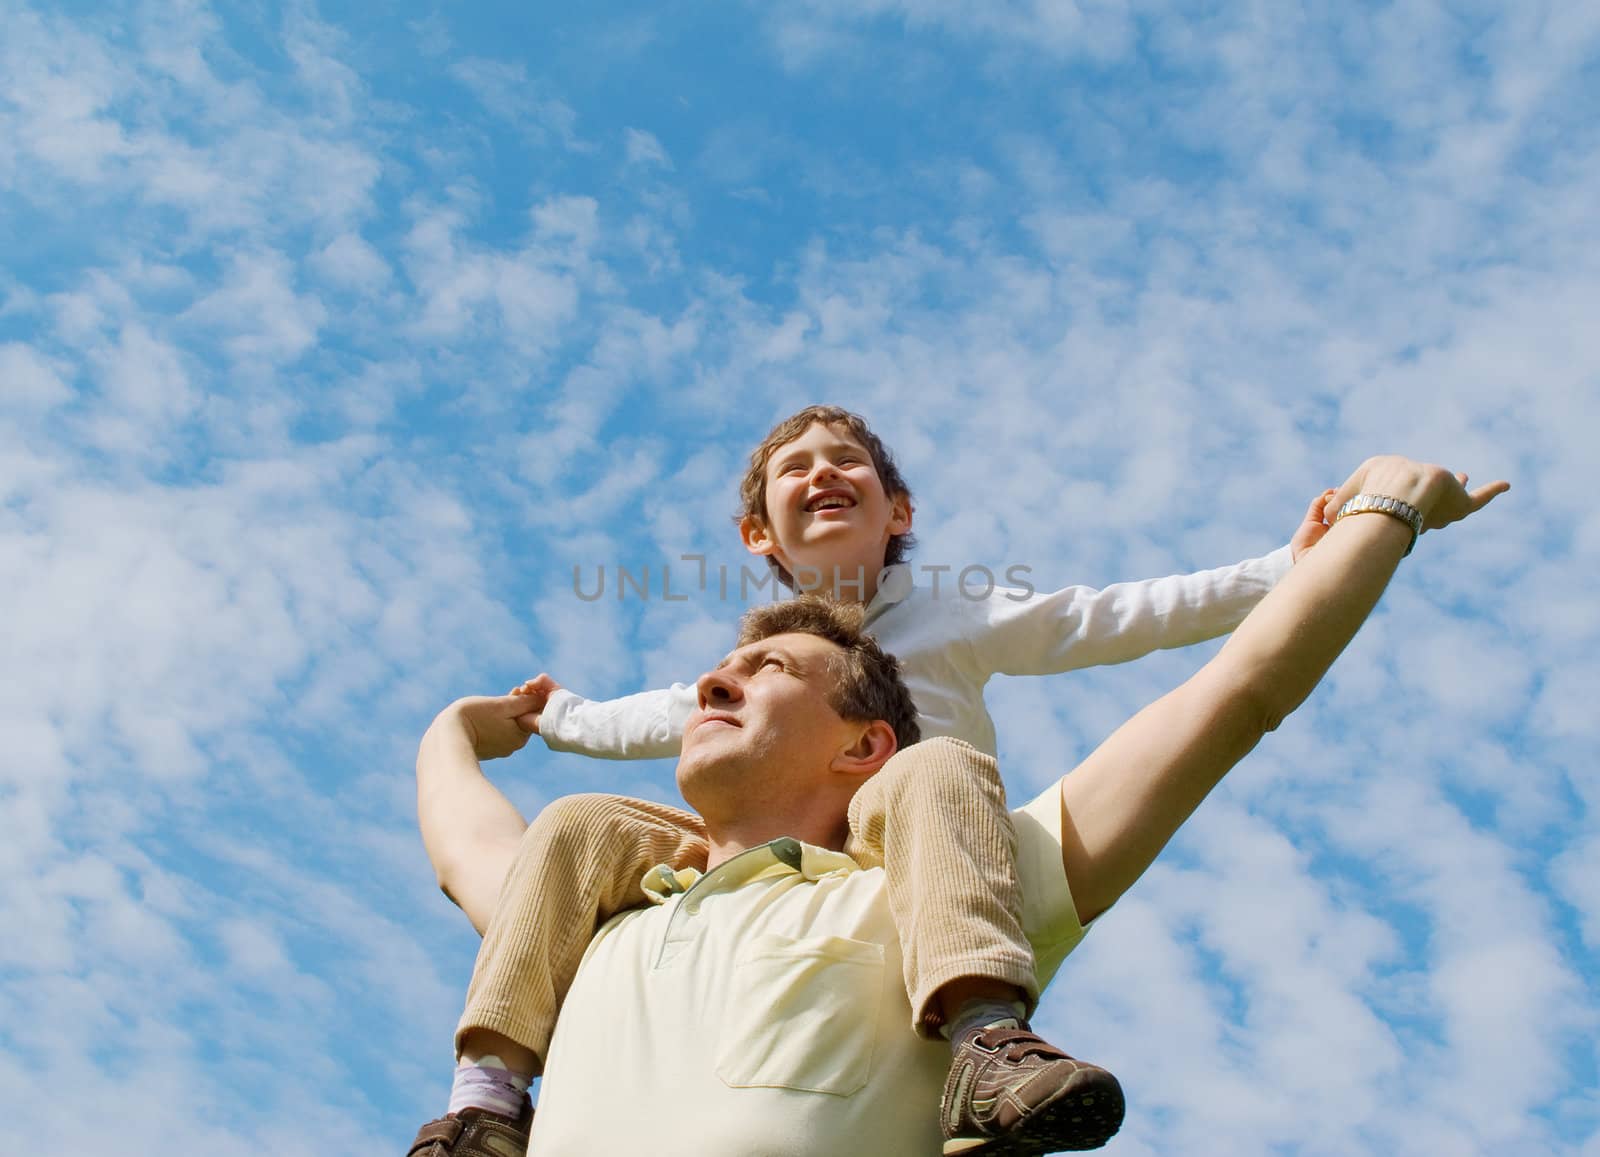 The father and his son against the blue sky